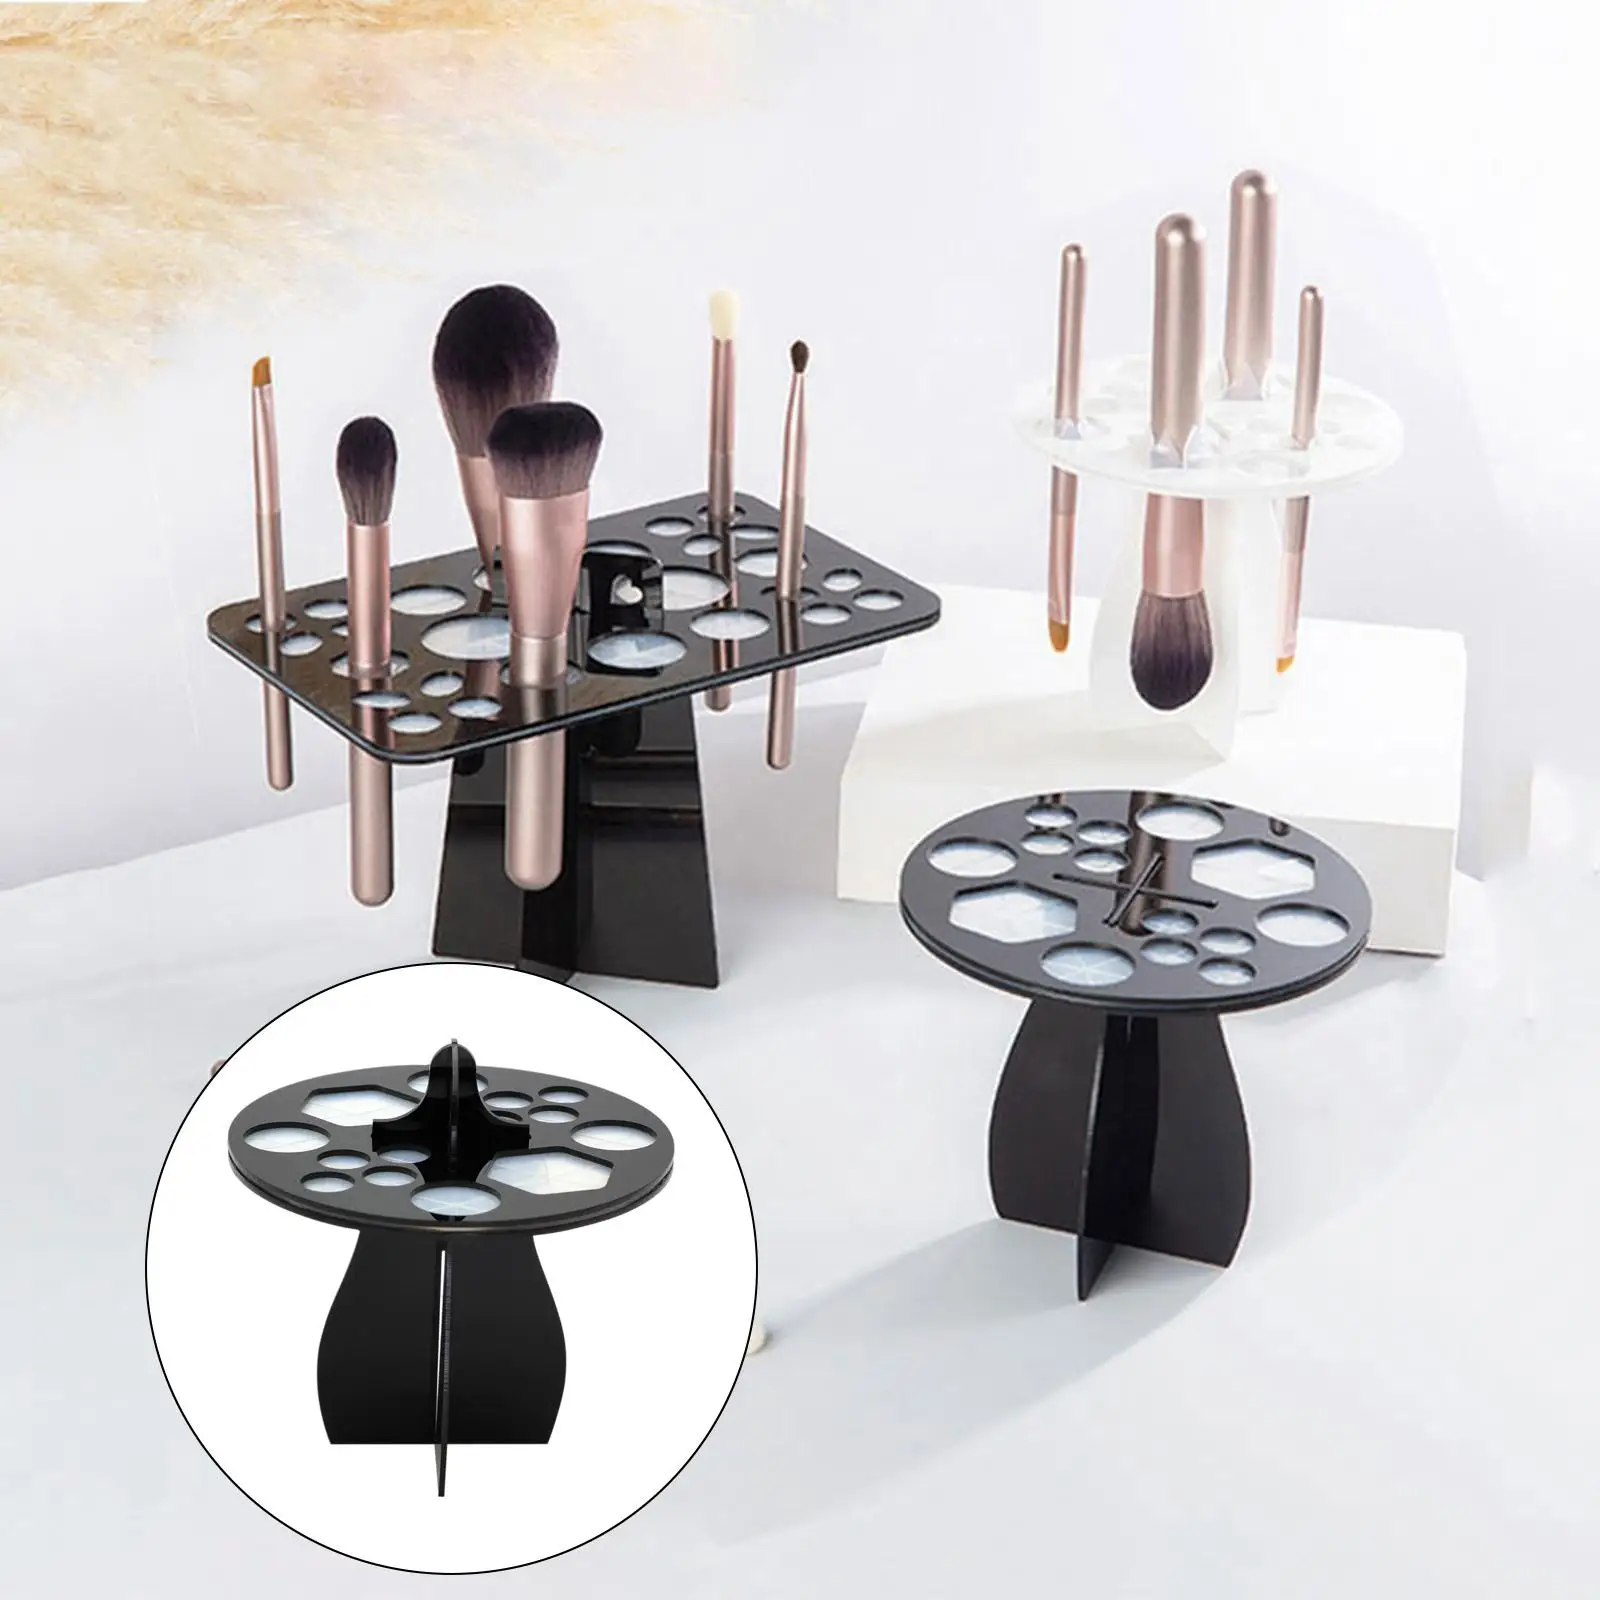 Acrylic Makeup Brushes Drying Rack, for Makeup Artist Waterproof Paint Brushes Dryer Tower Good Looking Paintbrushes Holder